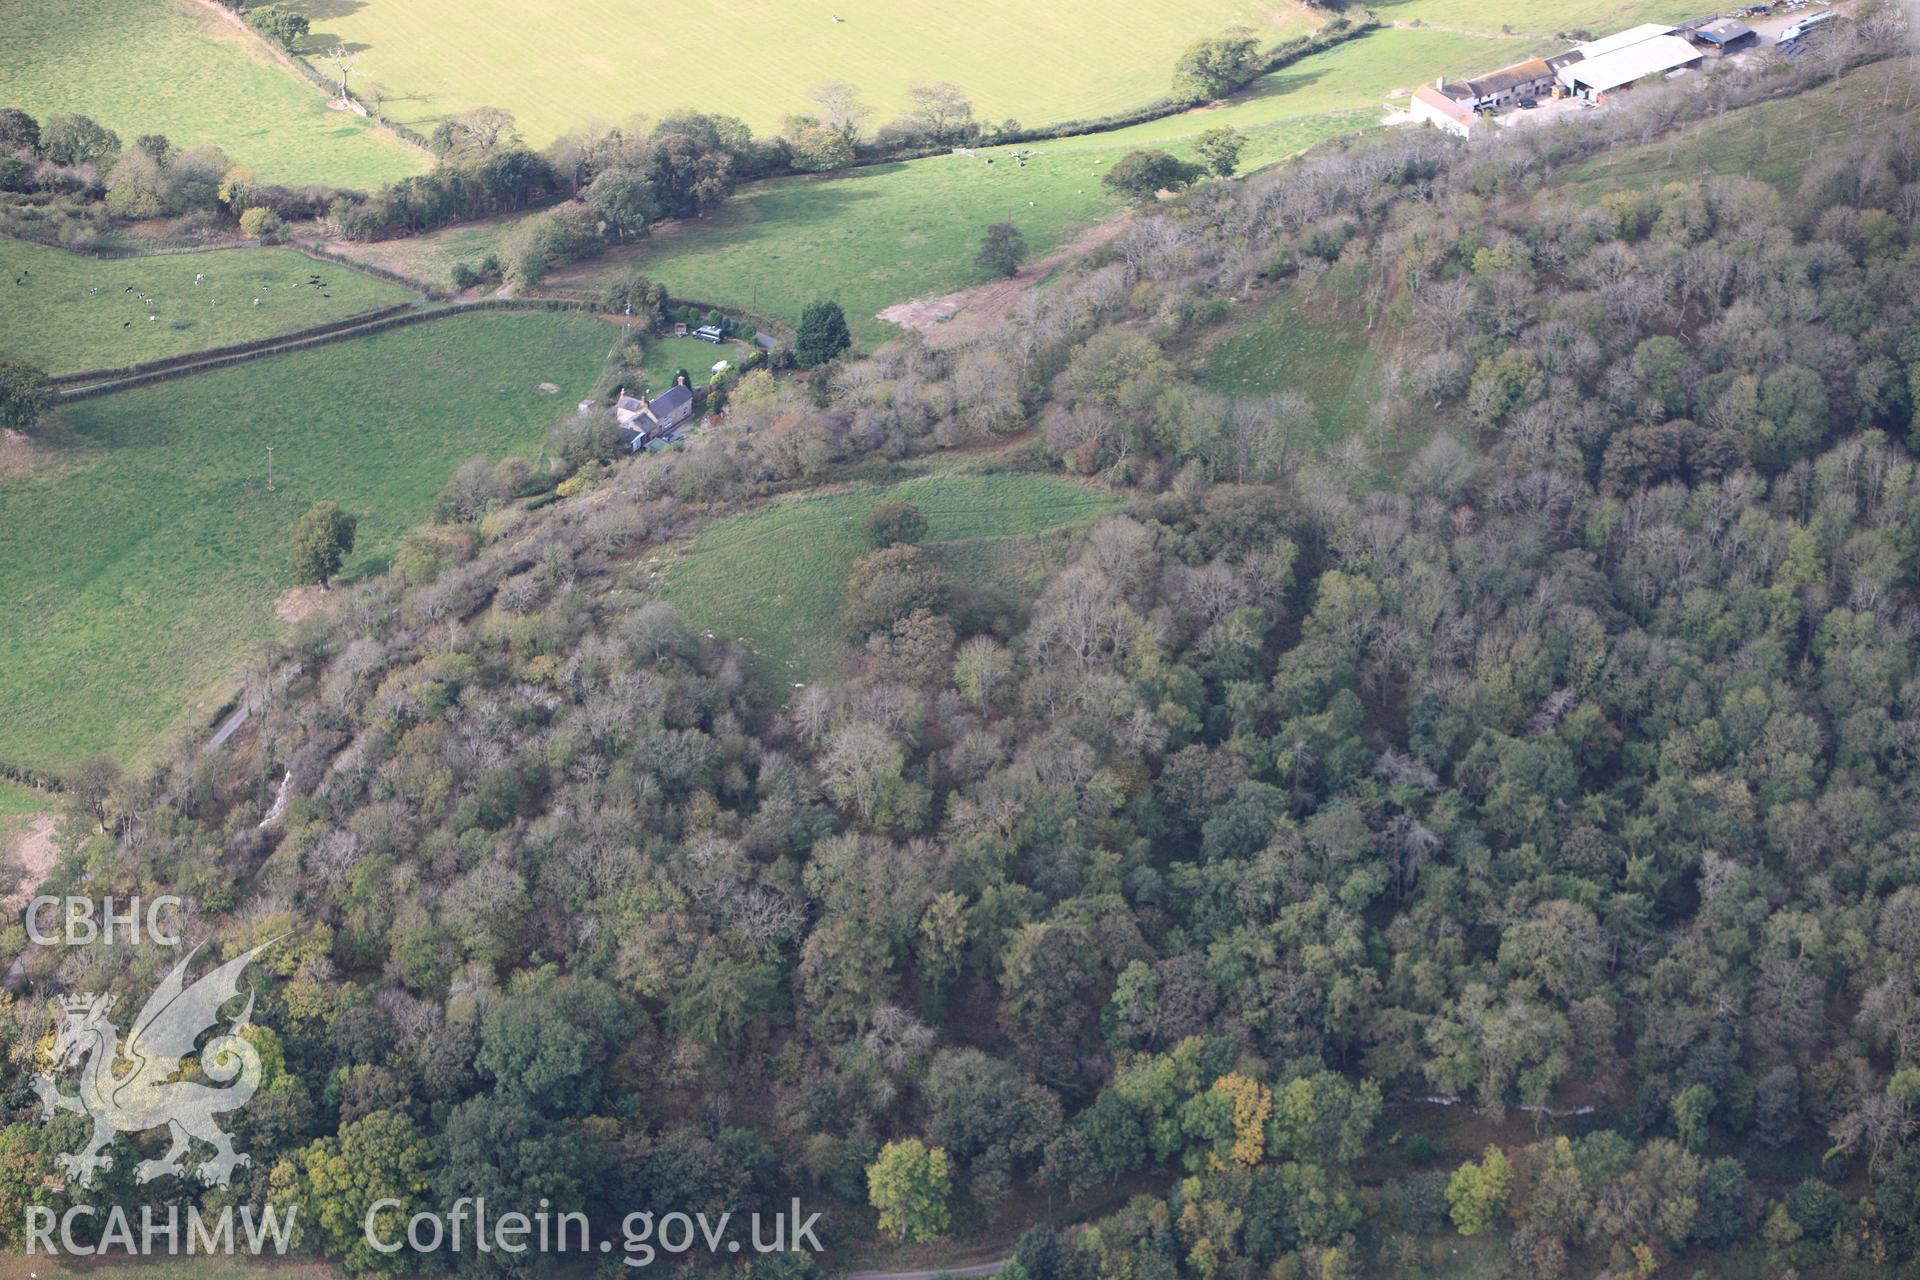 RCAHMW colour oblique photograph of Bedd-y-Cawr, Defended Enclosure. Taken by Toby Driver on 04/10/2011.